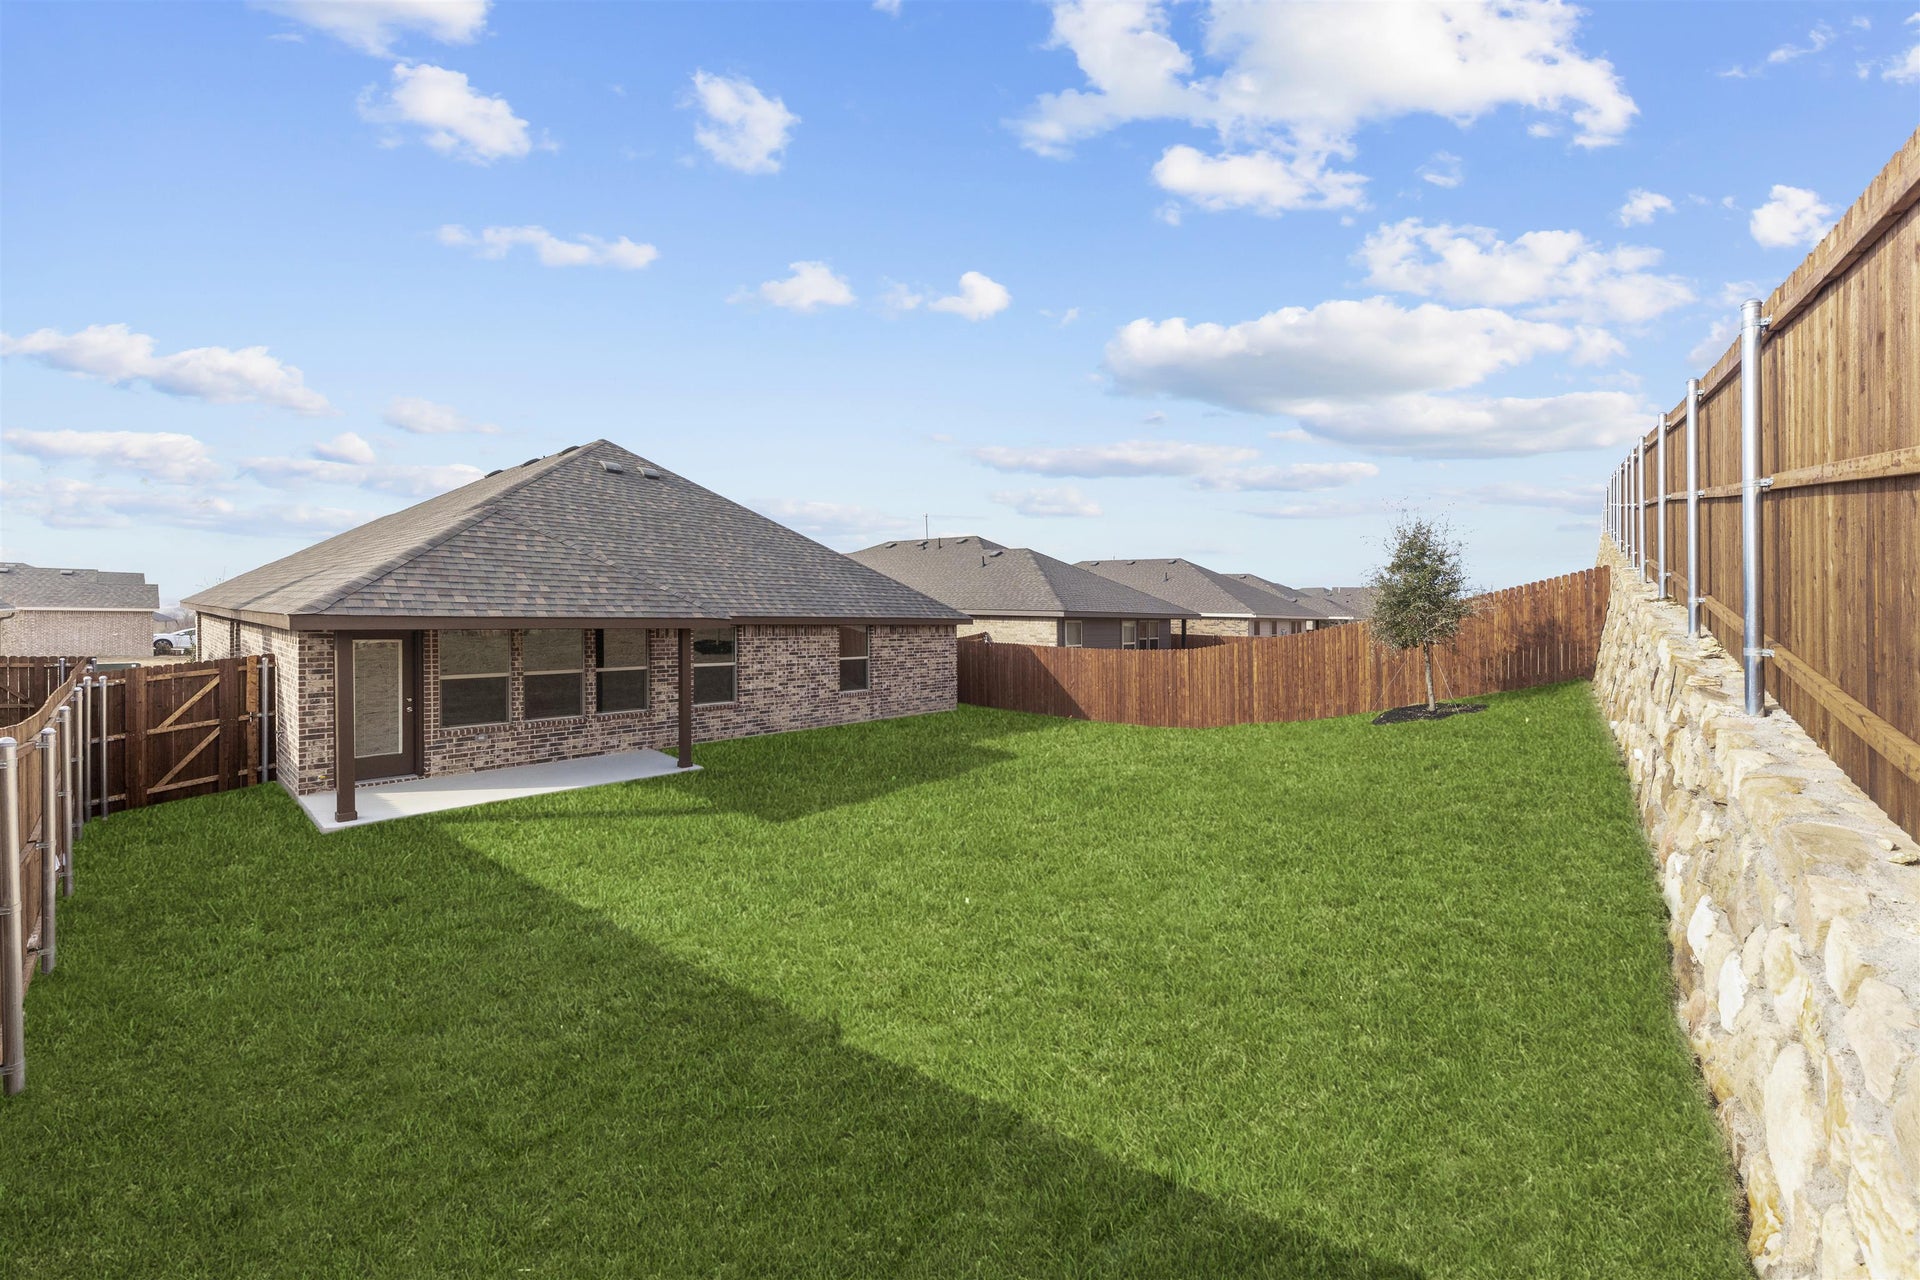 3br New Home in Weatherford, TX